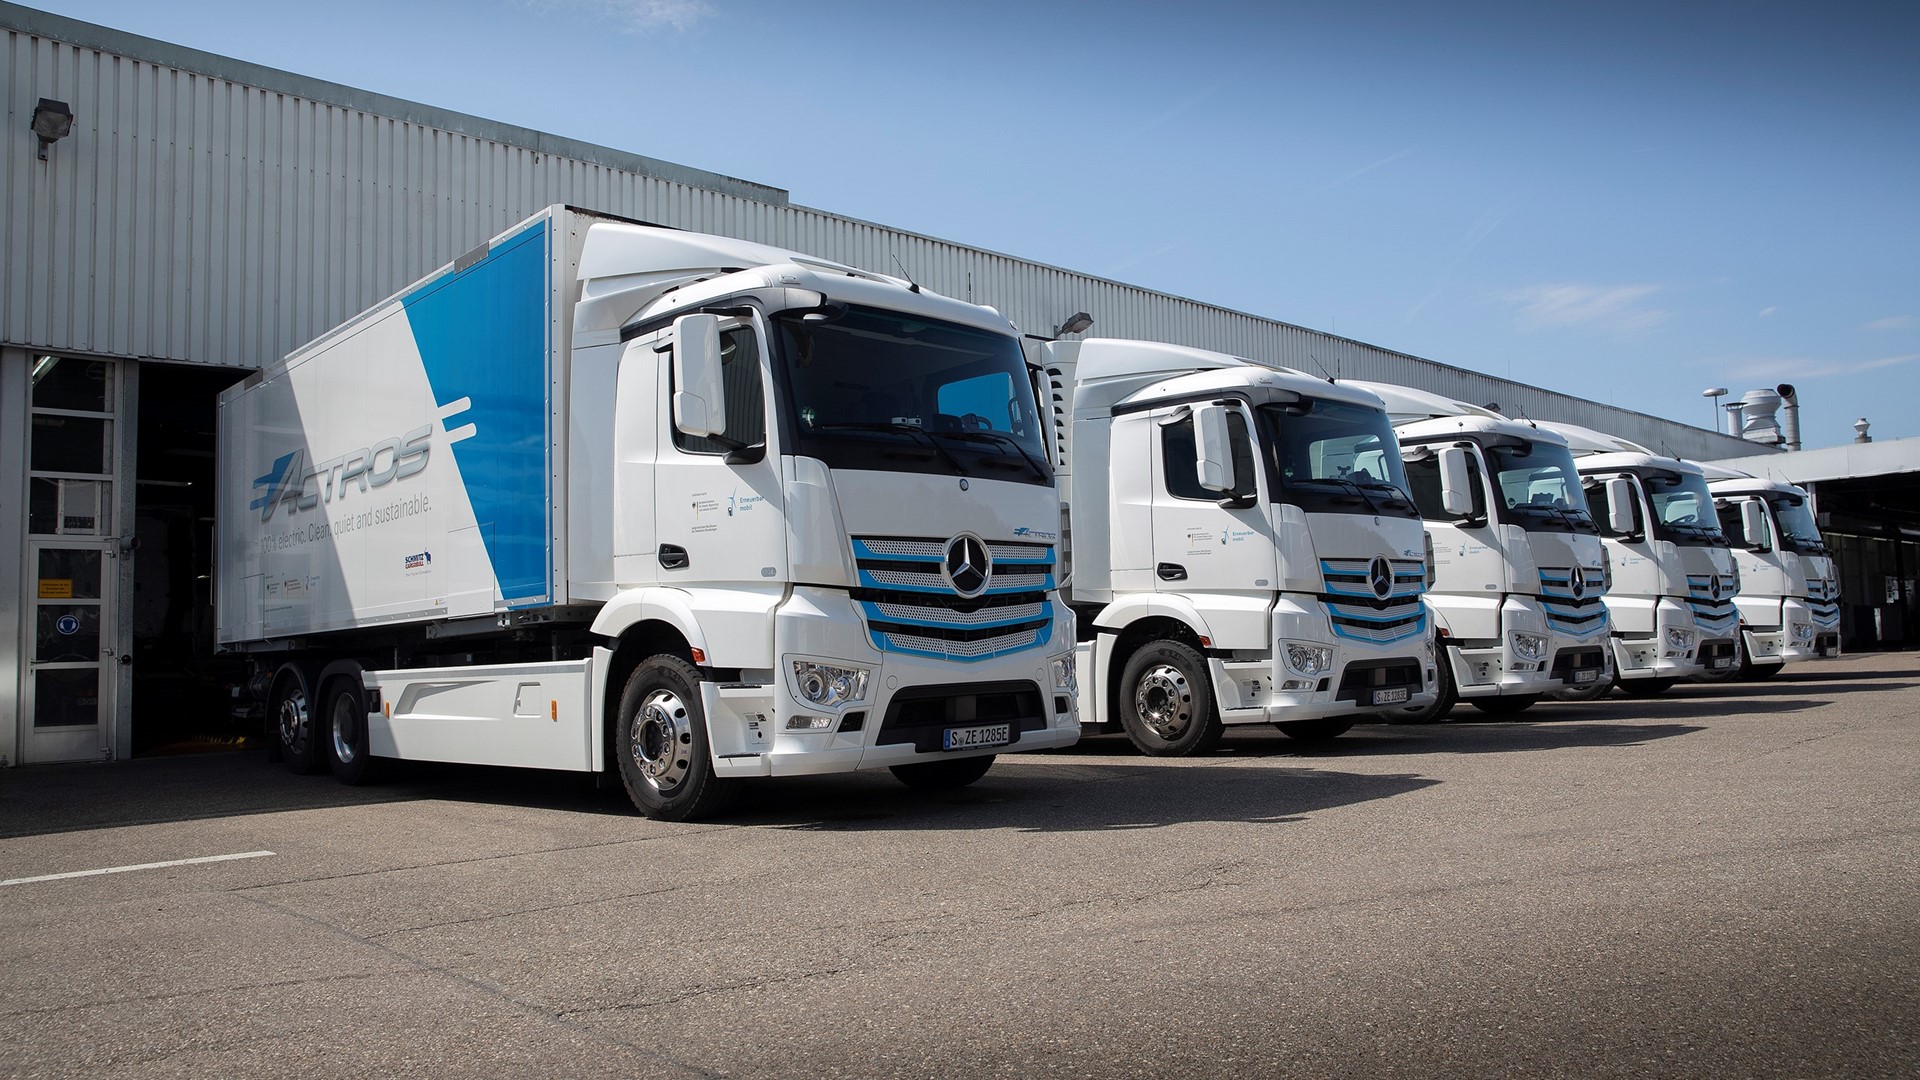 Electric vehicles from Daimler Trucks & Buses prove their capabilities